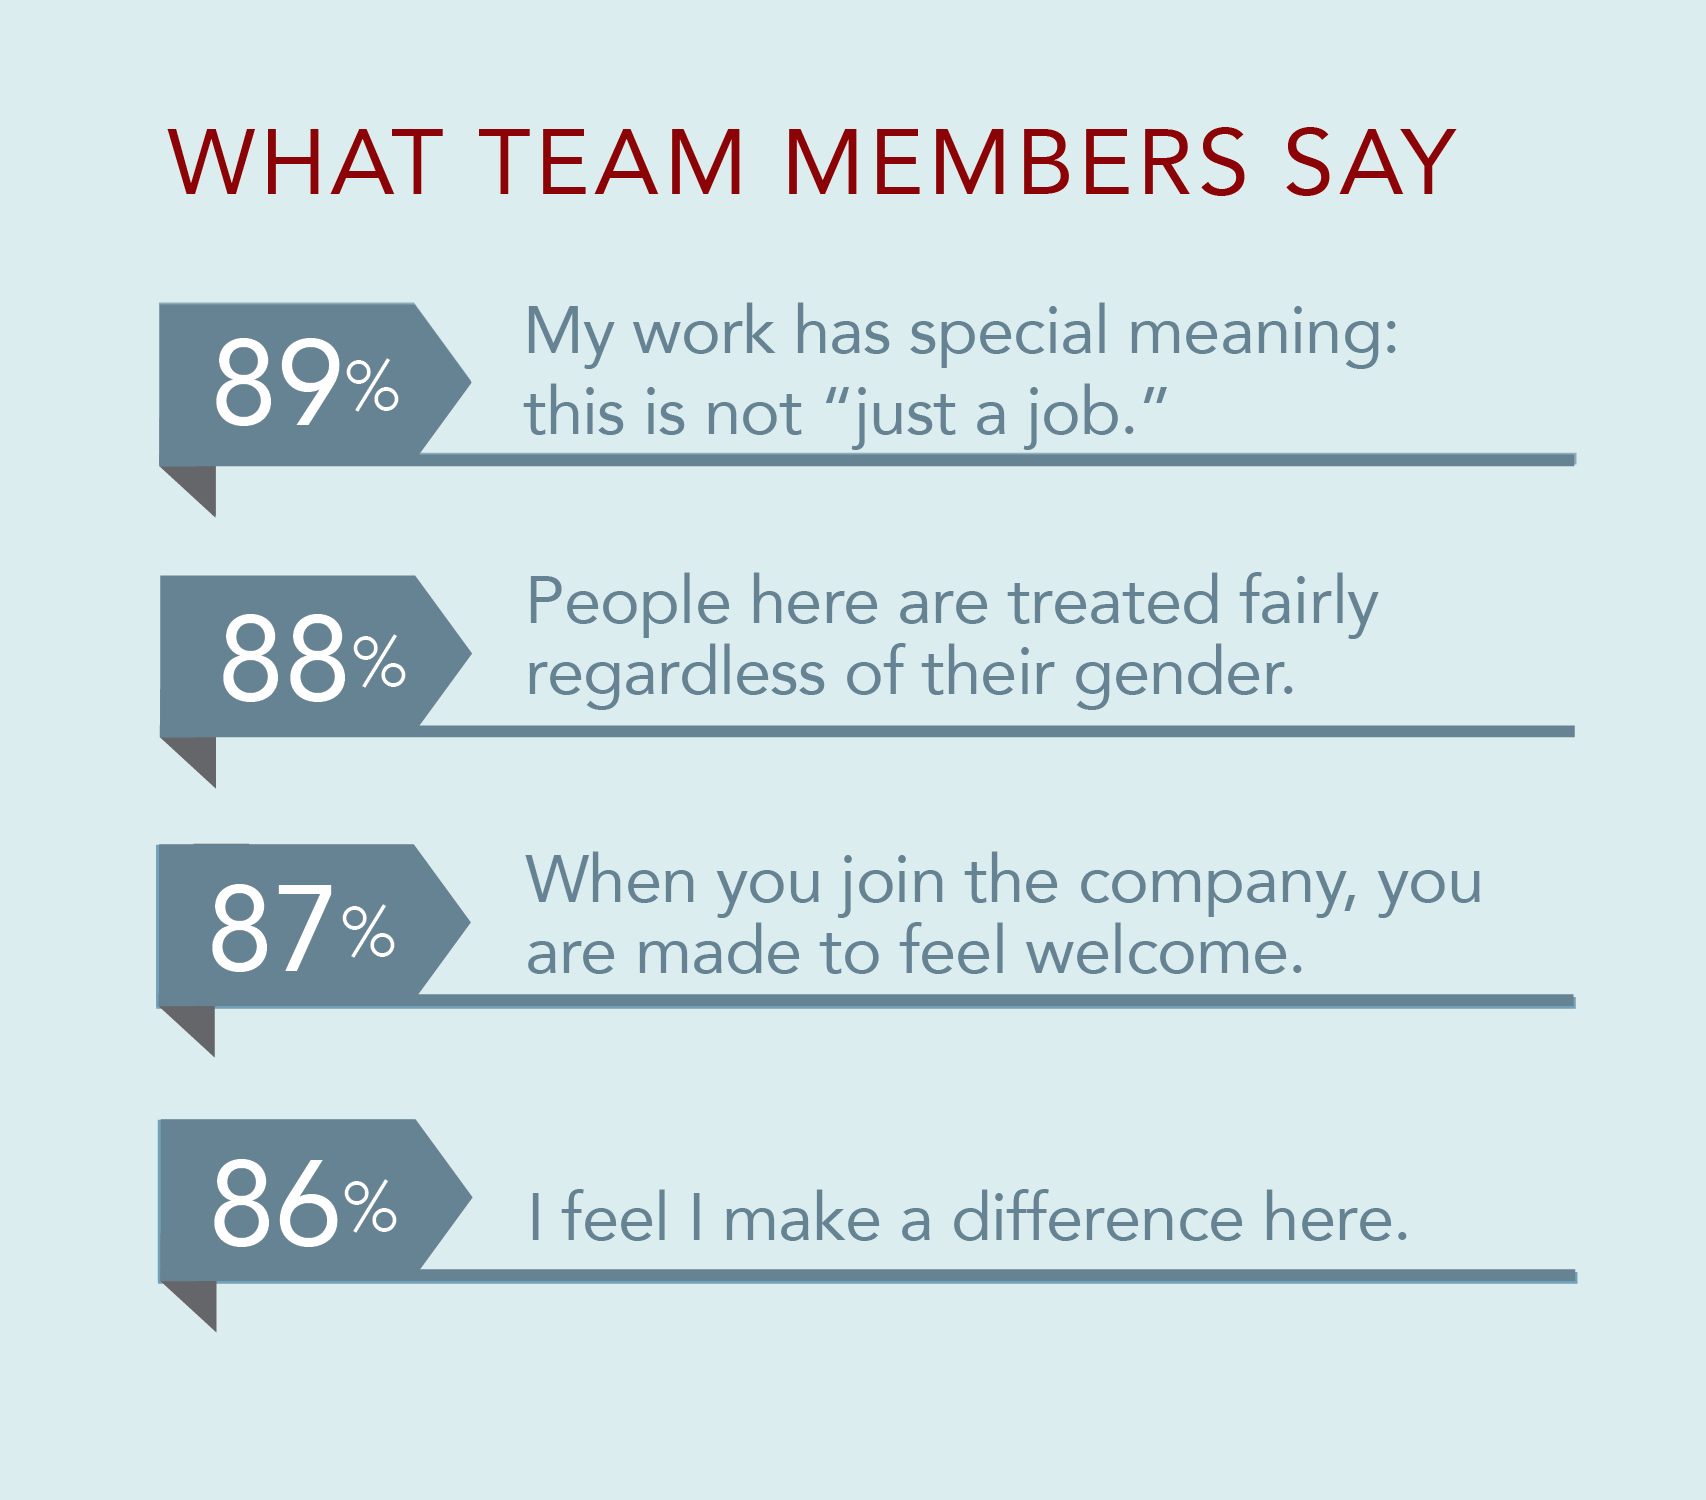 What Team Members Say about Working Here